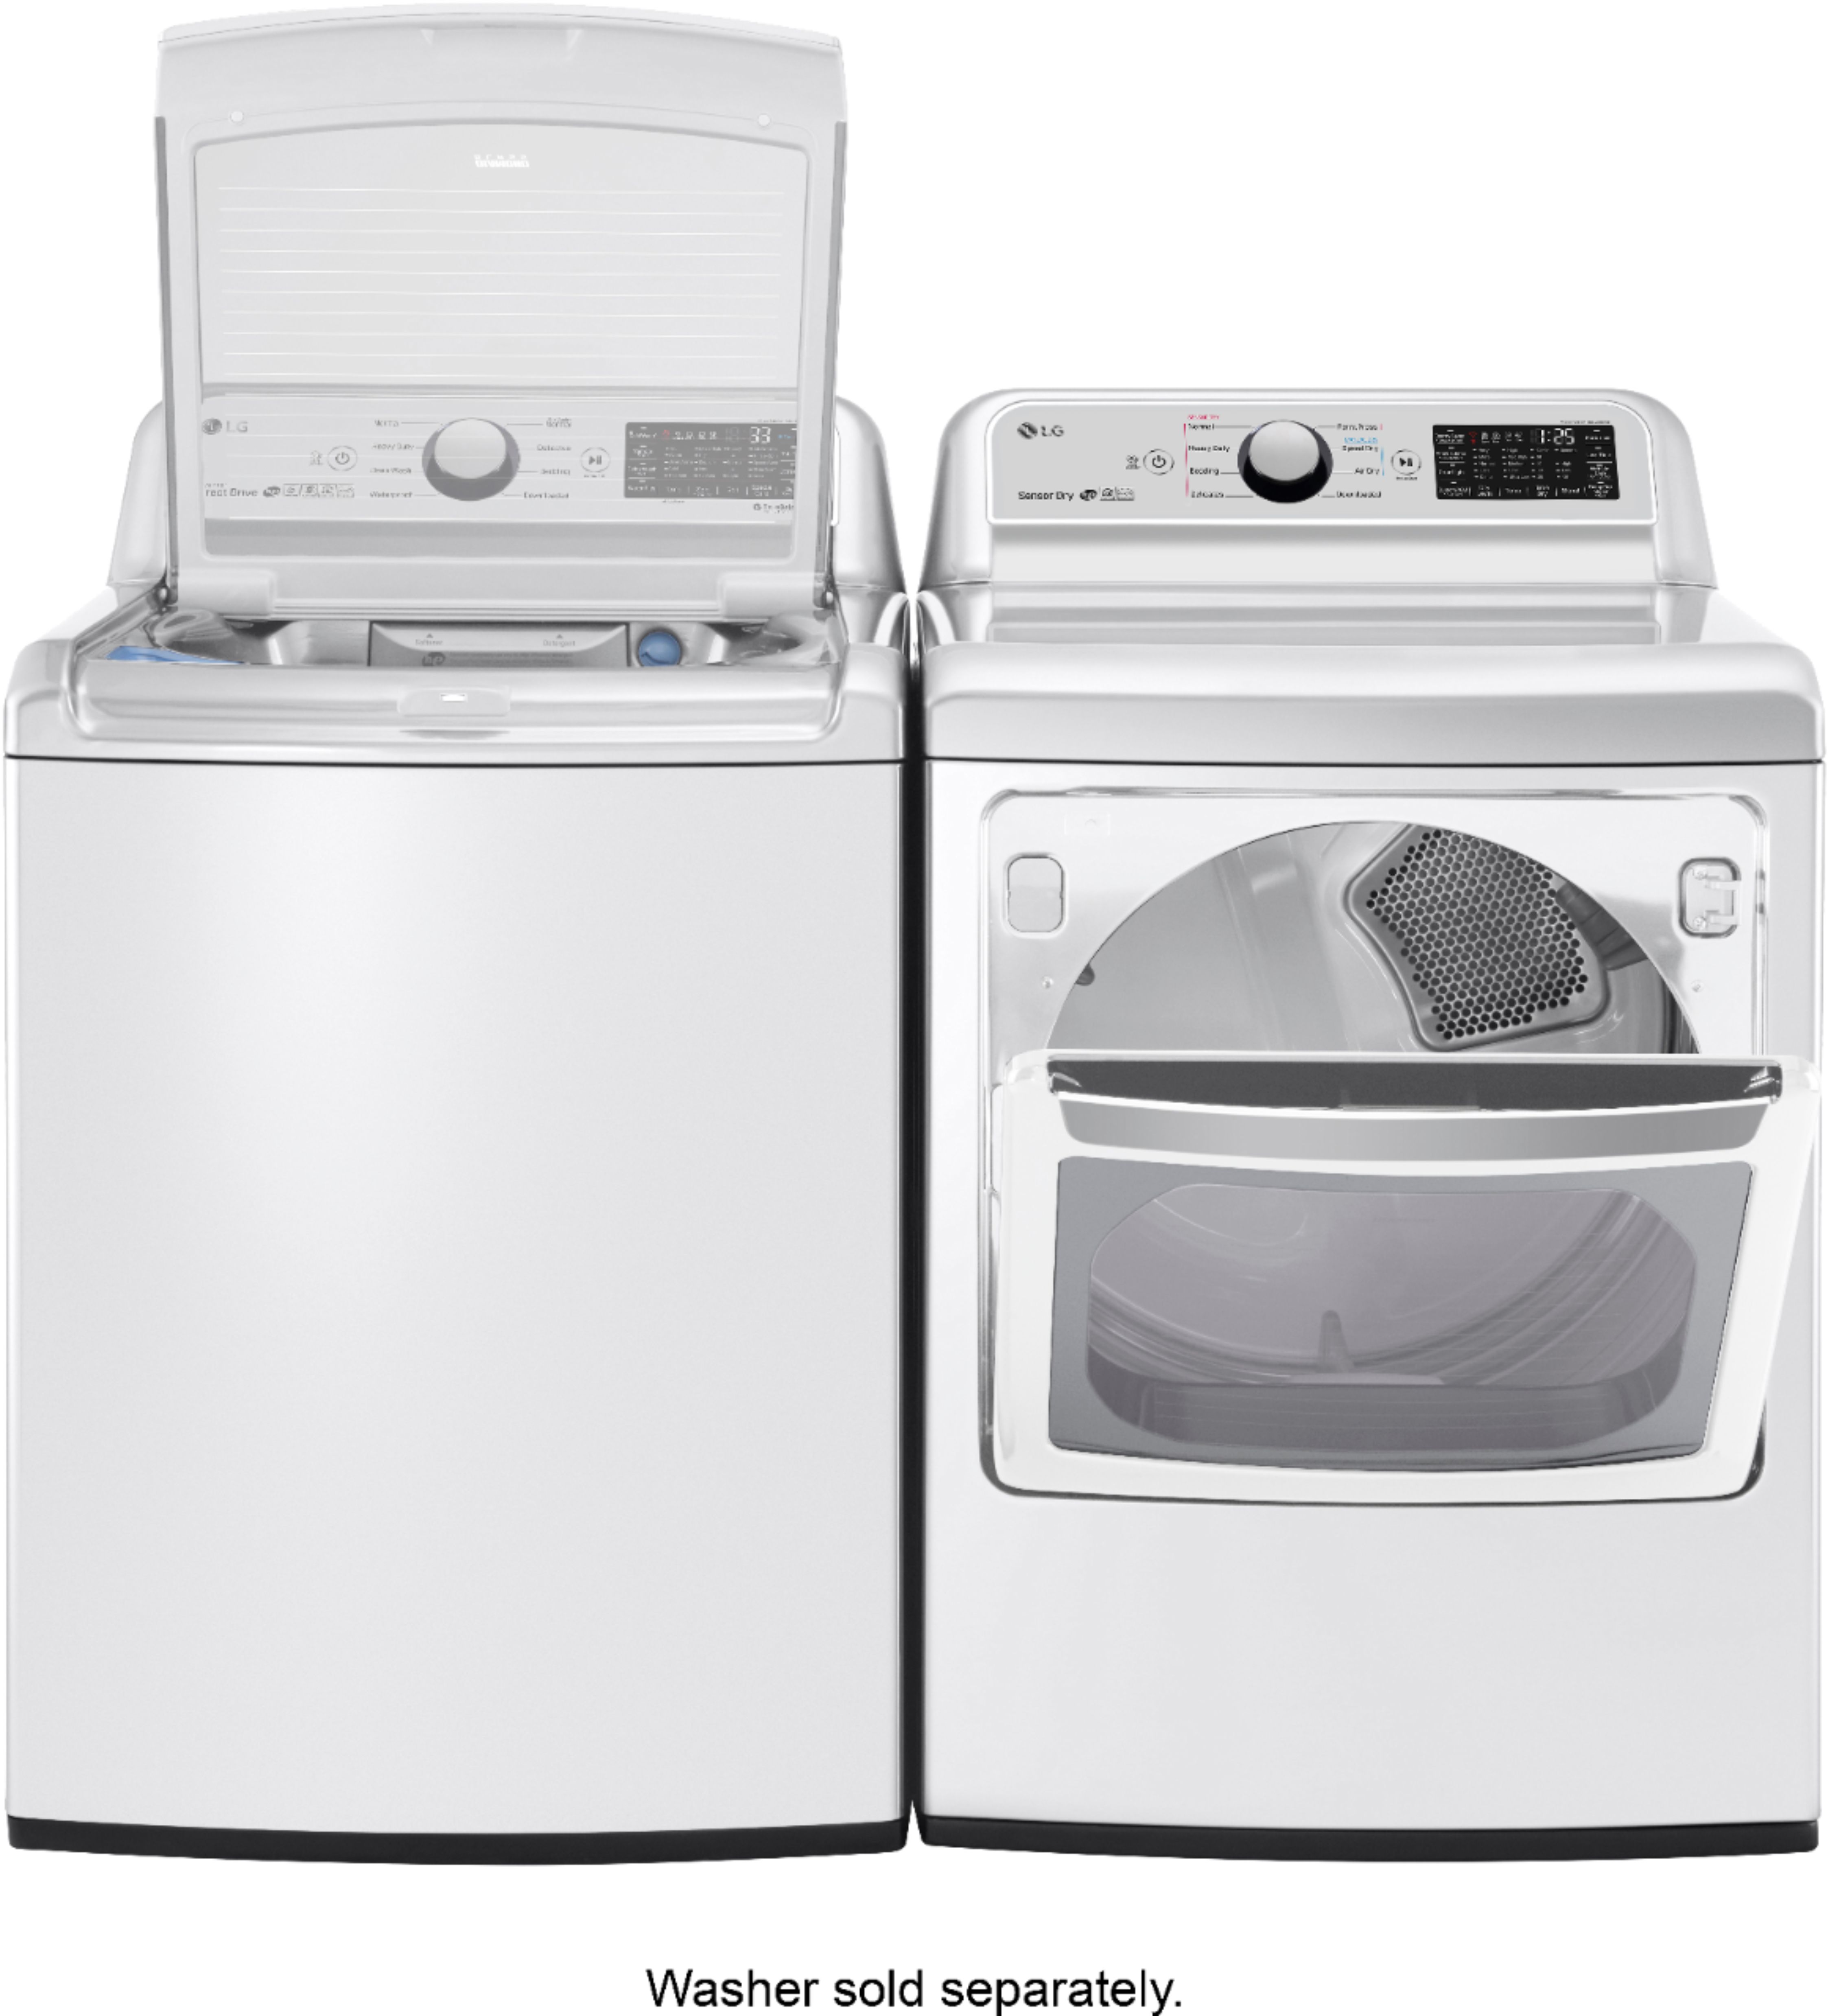 LG 7.3 Cu. Ft. Smart Electric Dryer with Sensor Dry - DLE7300WE